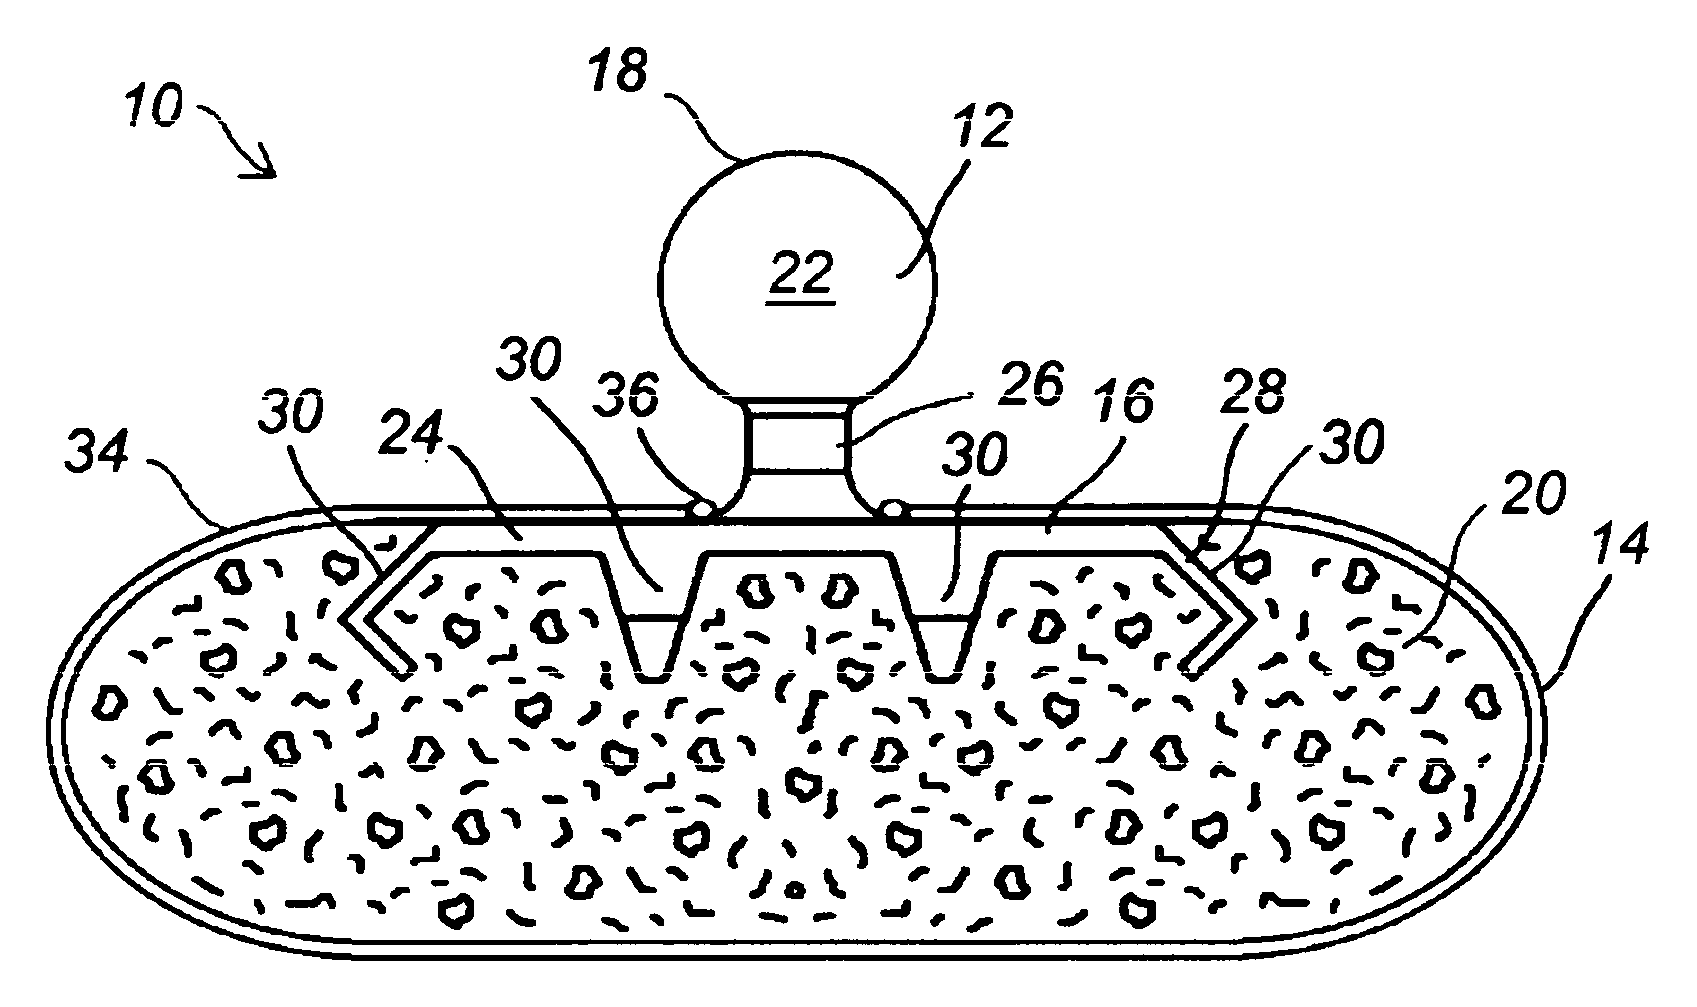 Adaptive mounting structure